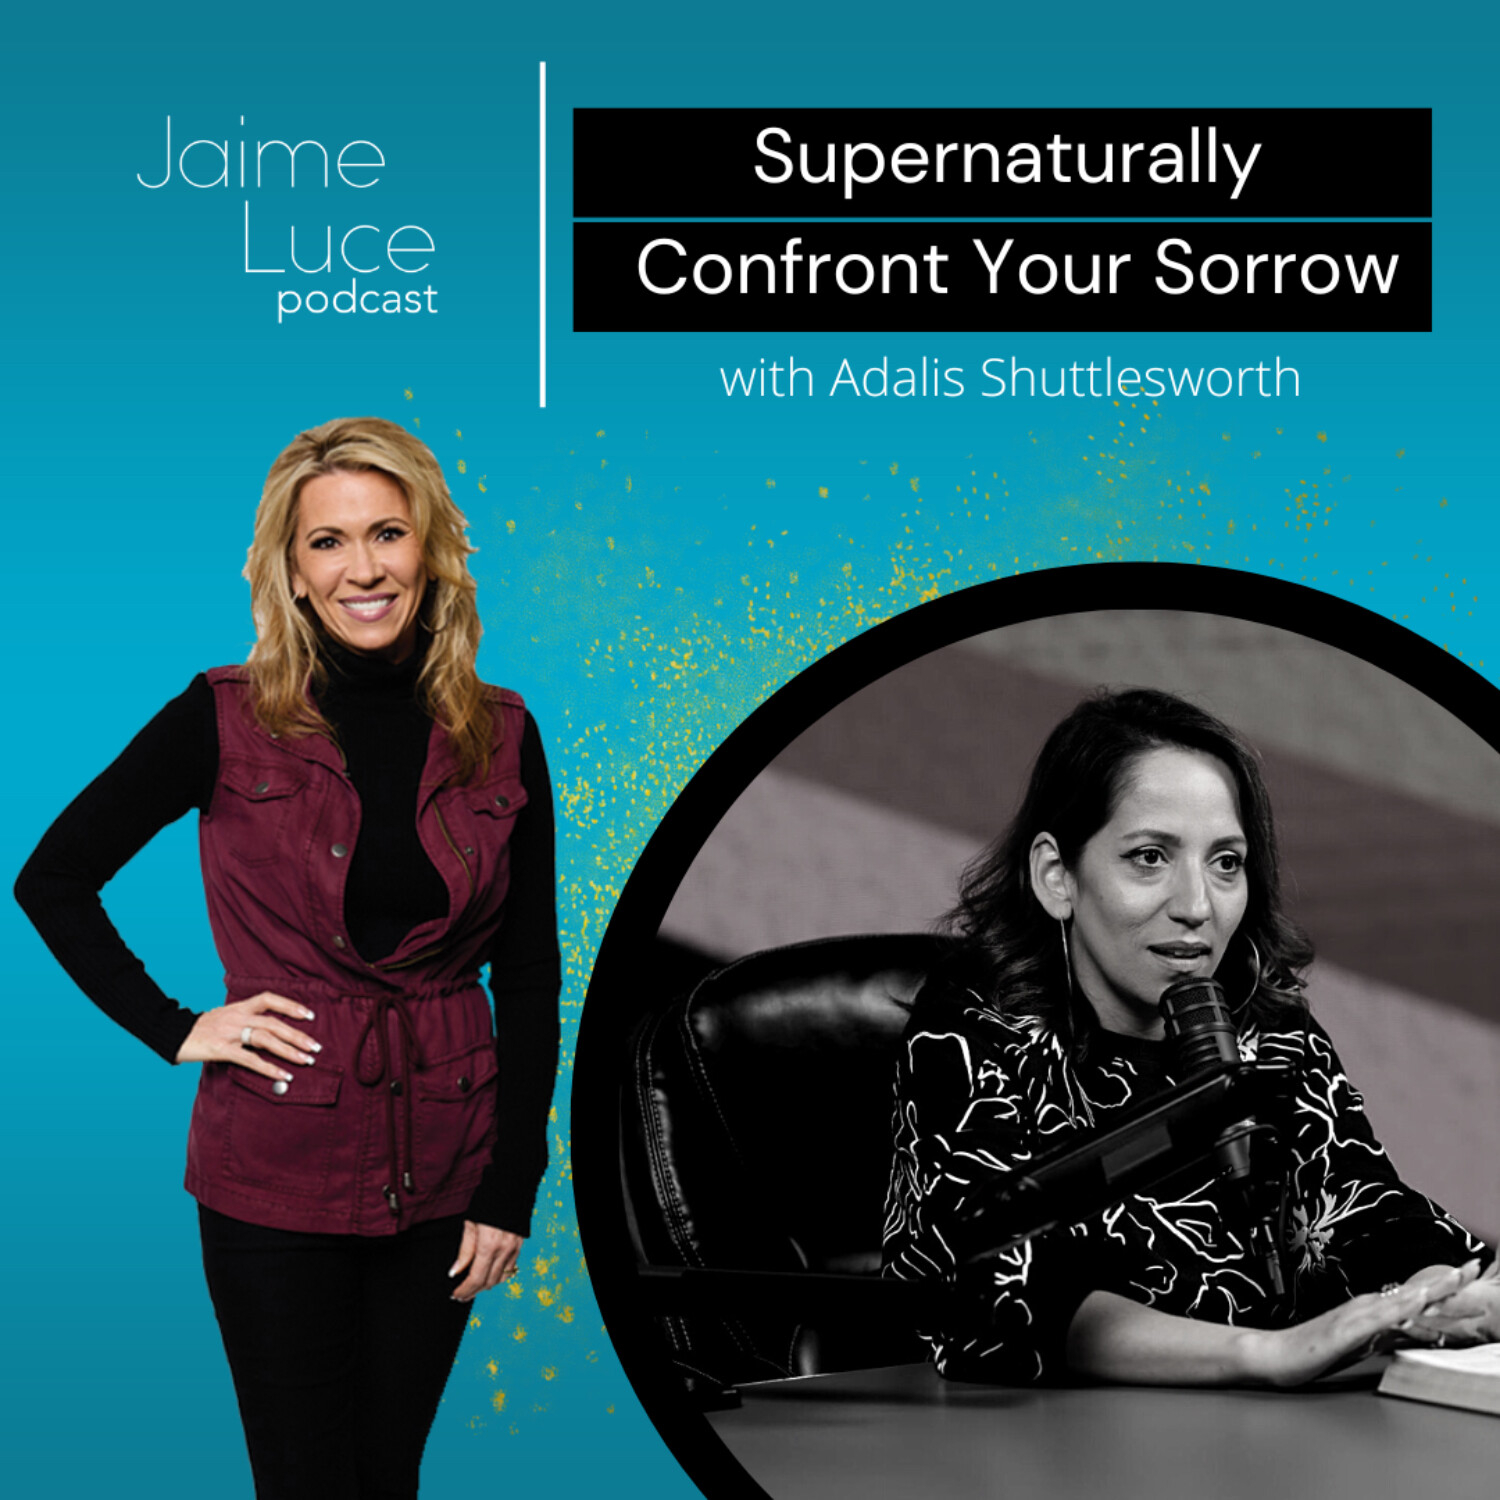 Supernaturally Confront Your Sorrow with Adalis Shuttlesworth